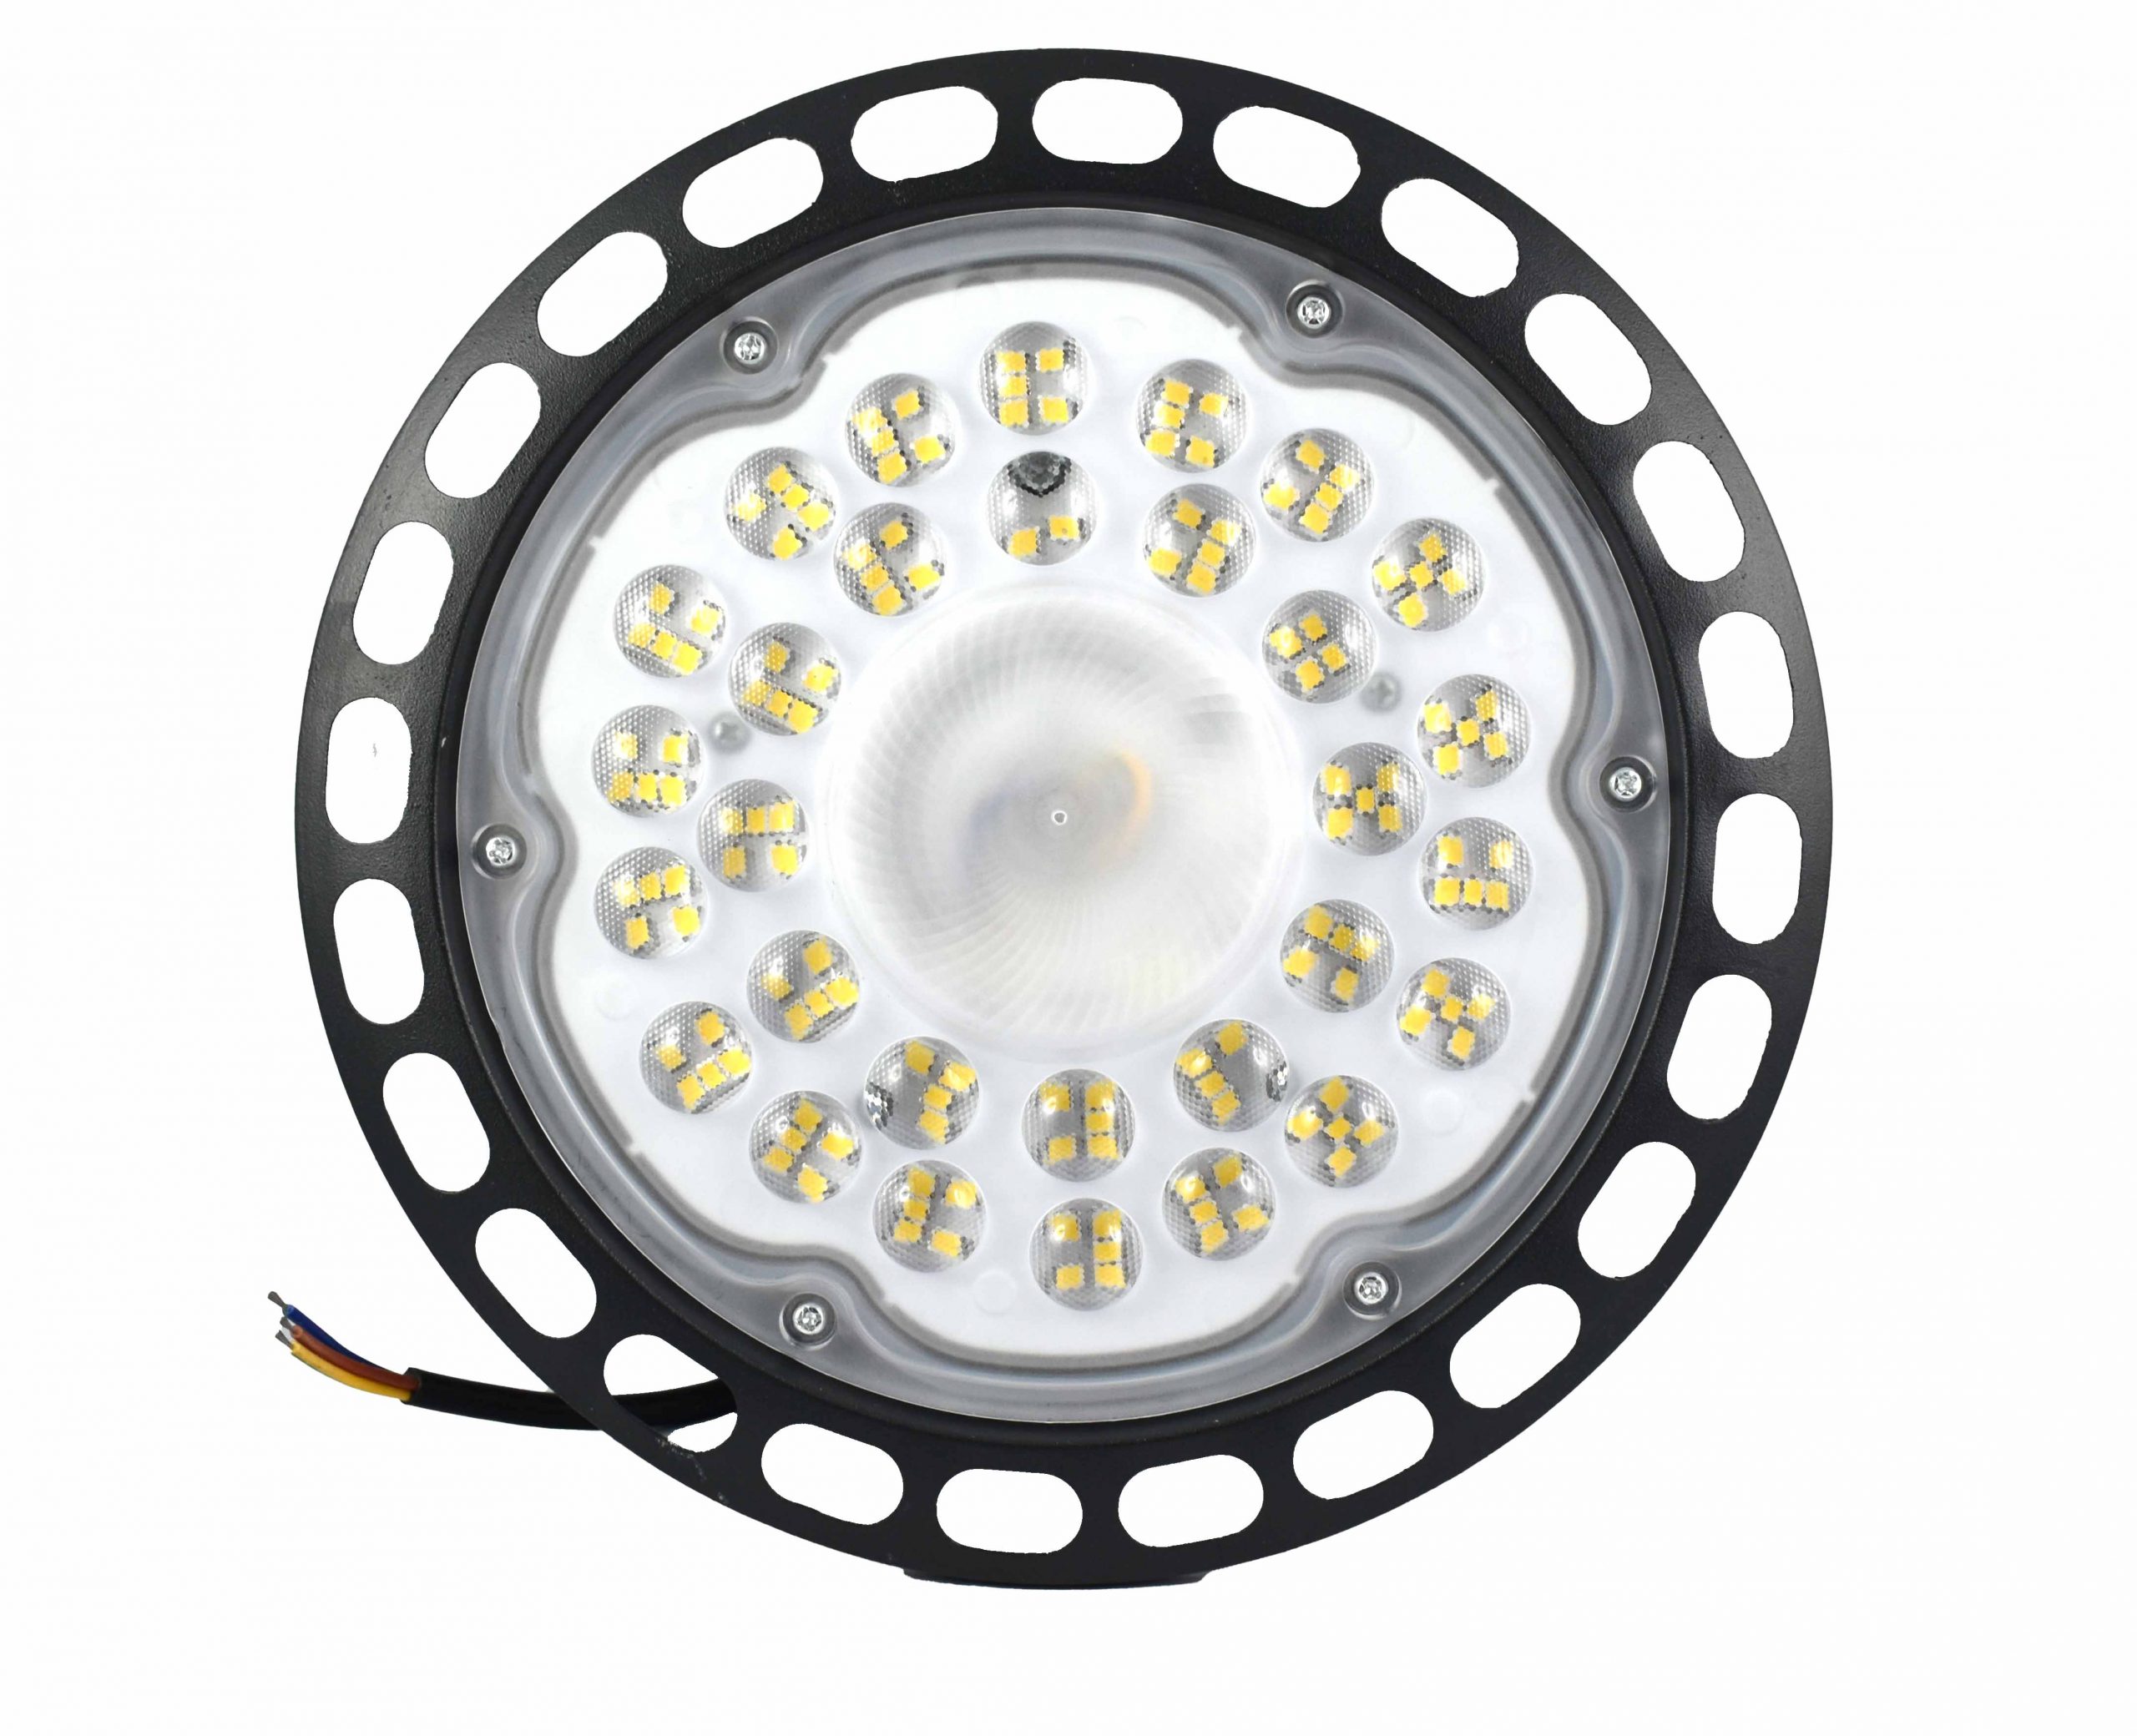 Corp led industrial 100 w